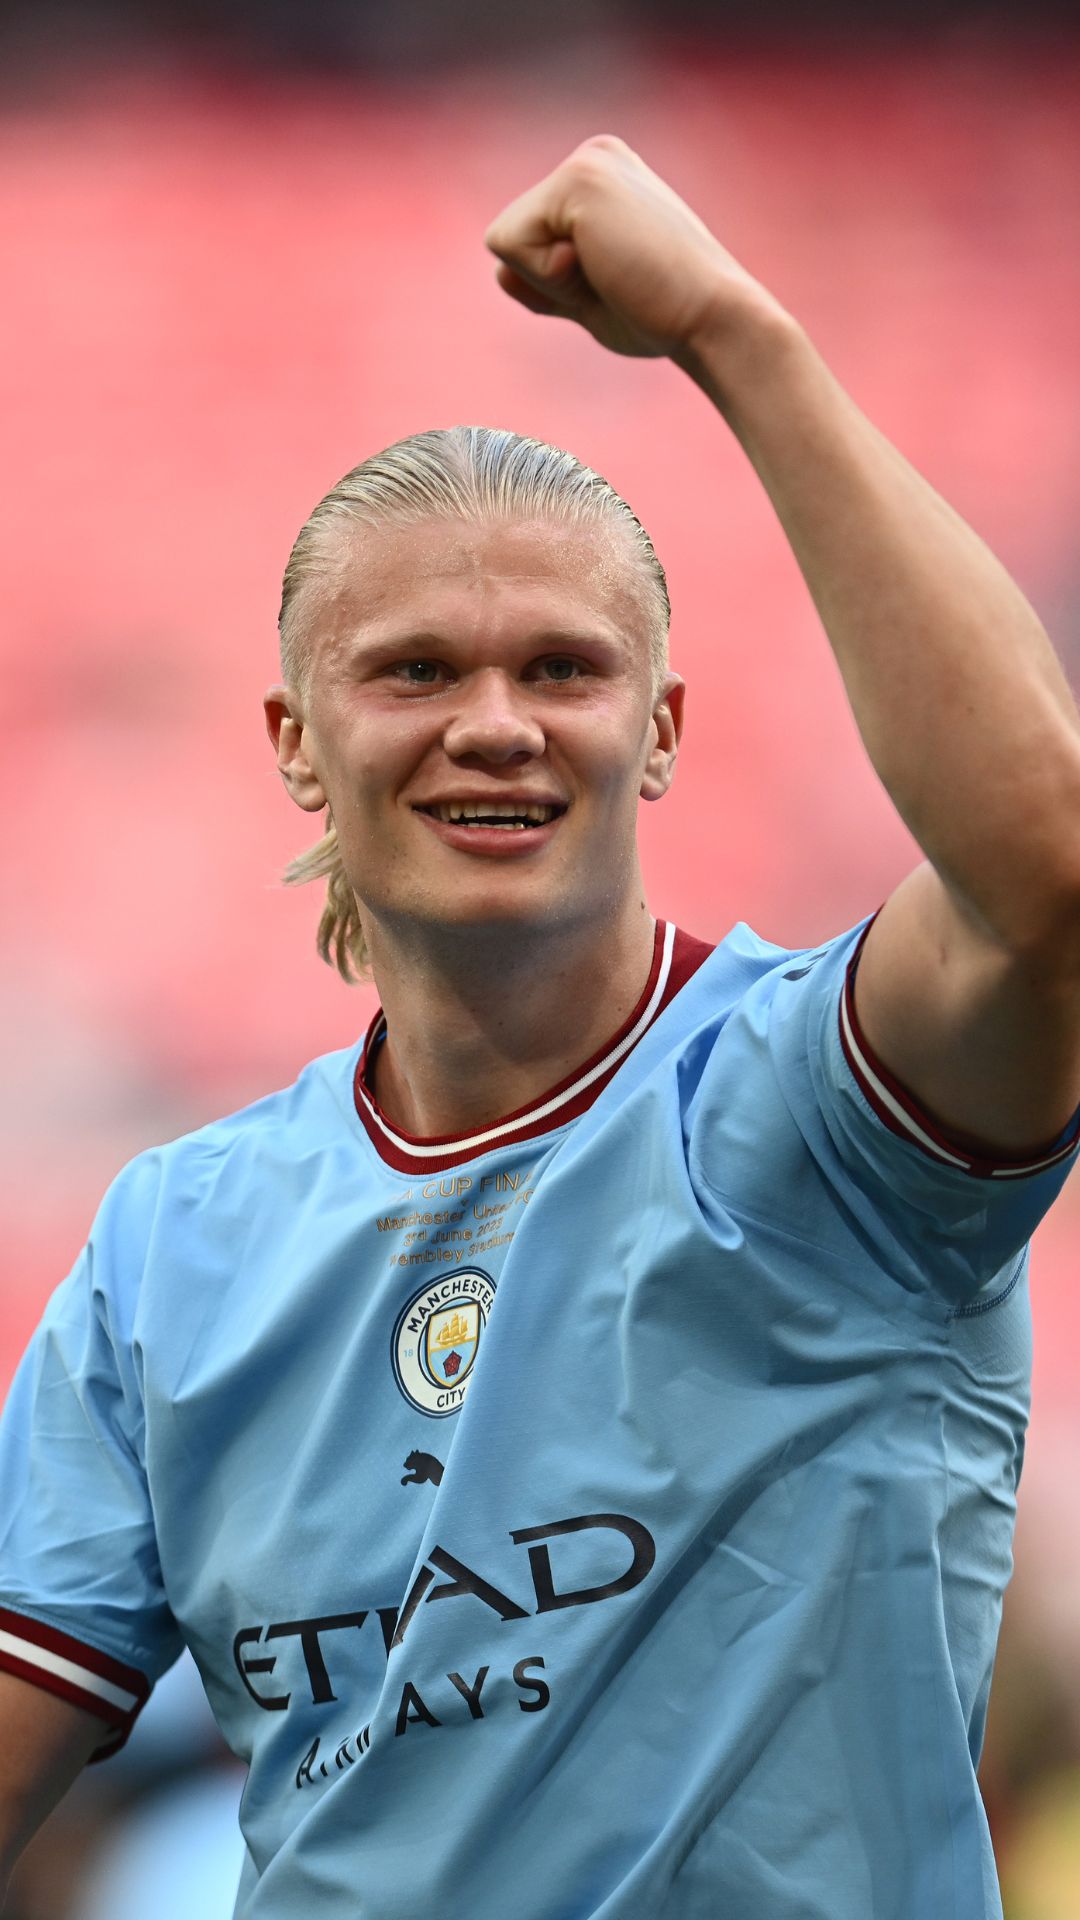 Erling Haaland surpasses Kylian Mbappe in the Top 10 most expensive football players